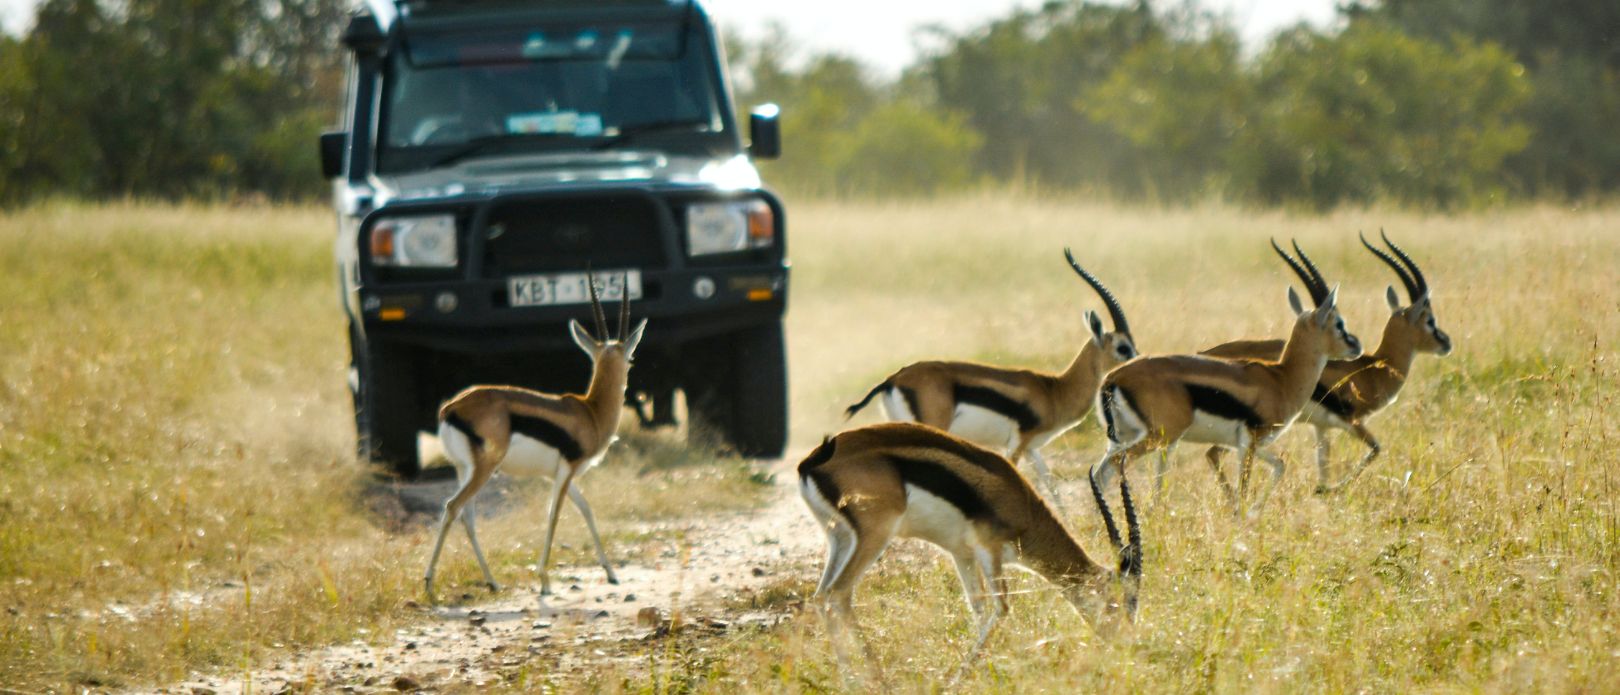 Deer crossing a dirt road in front of a tourist car in a Kenyan nature reserve. 